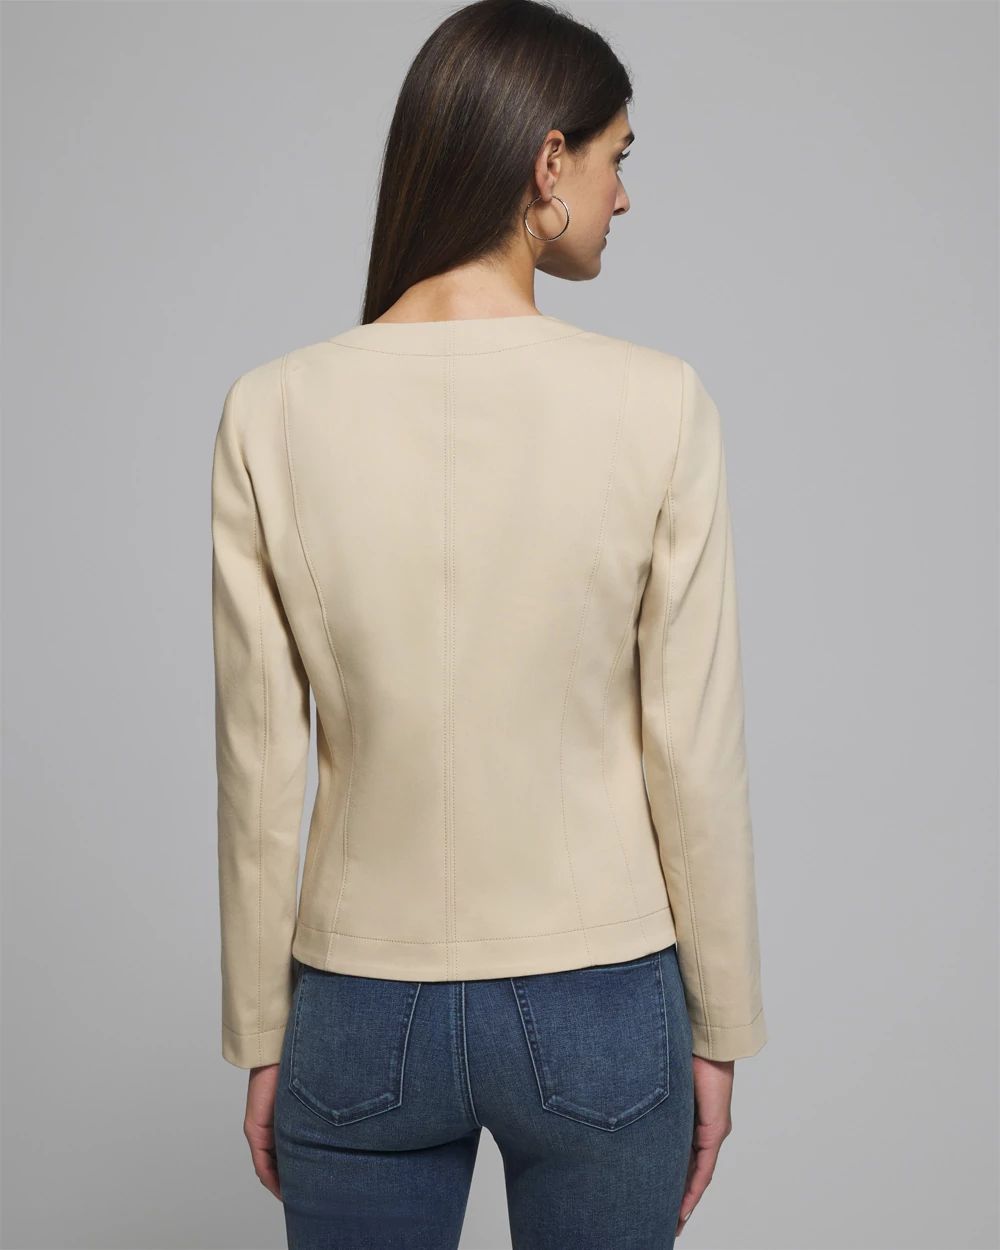 Outlet WHBM Long Sleeve Collarless Jacket